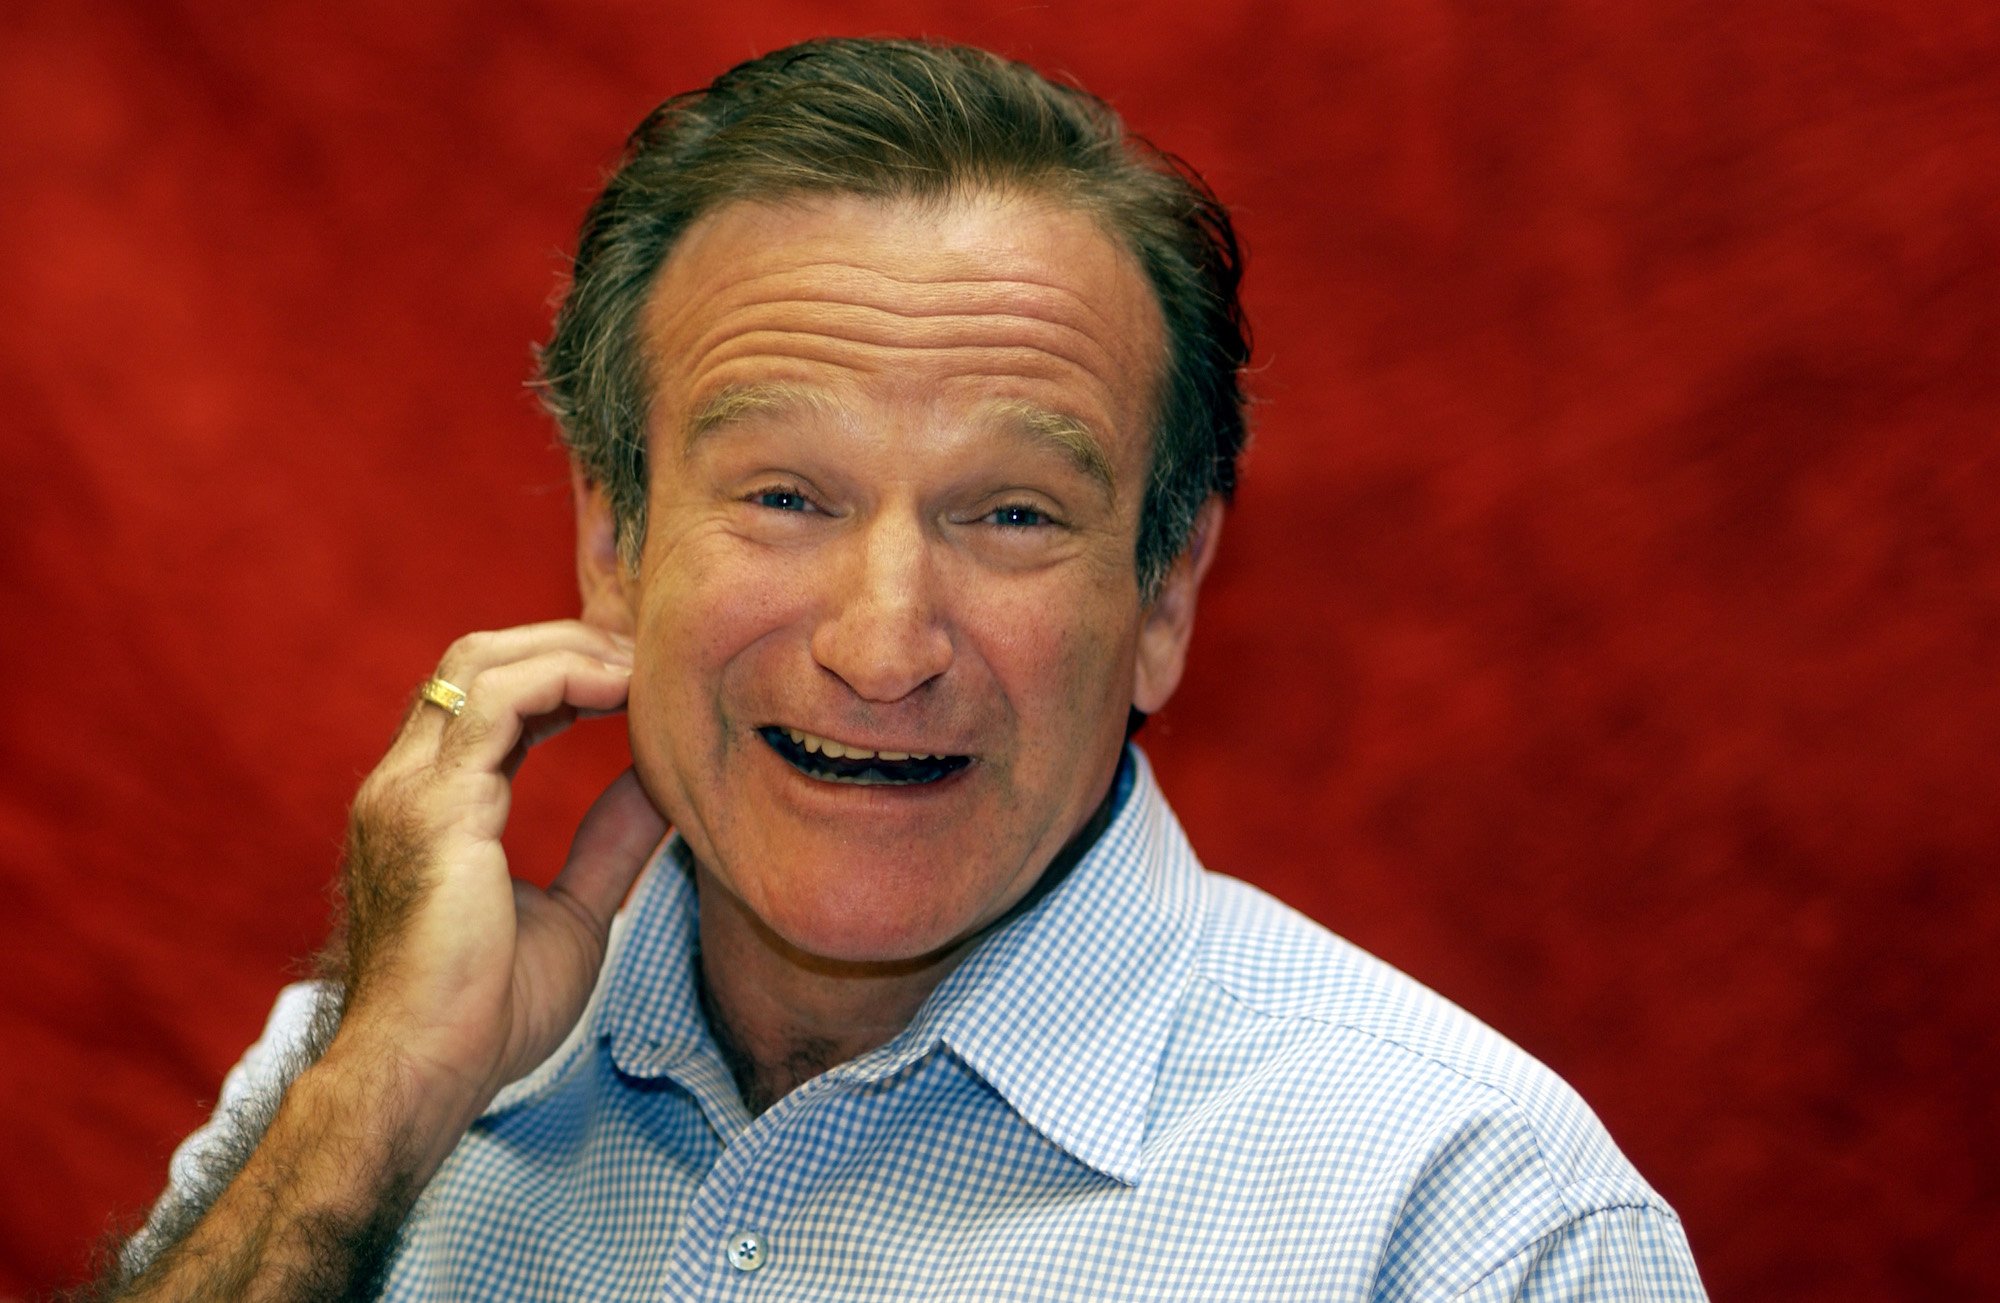 Robin Williams smiling in front of a red background